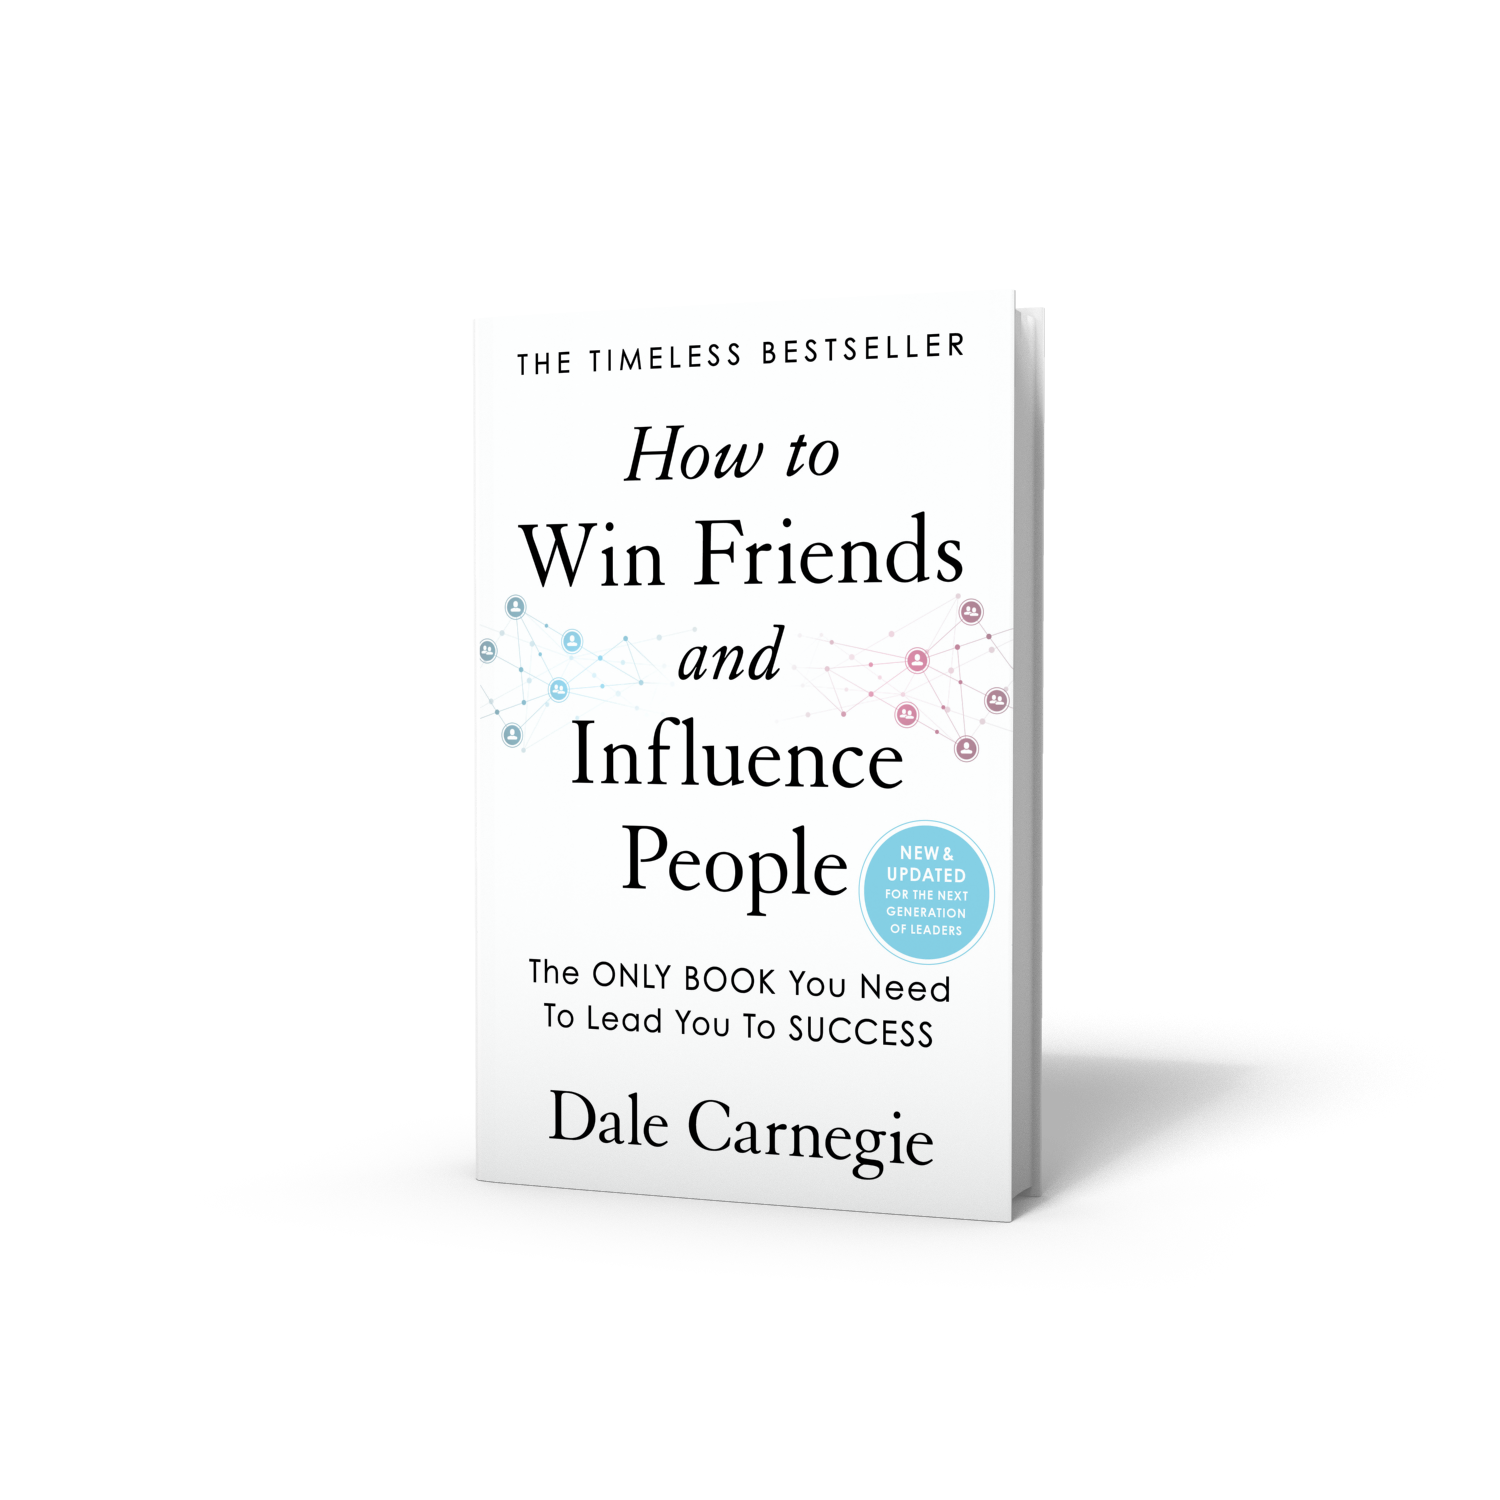 How to Win Friends and Influence People • Course 🎓